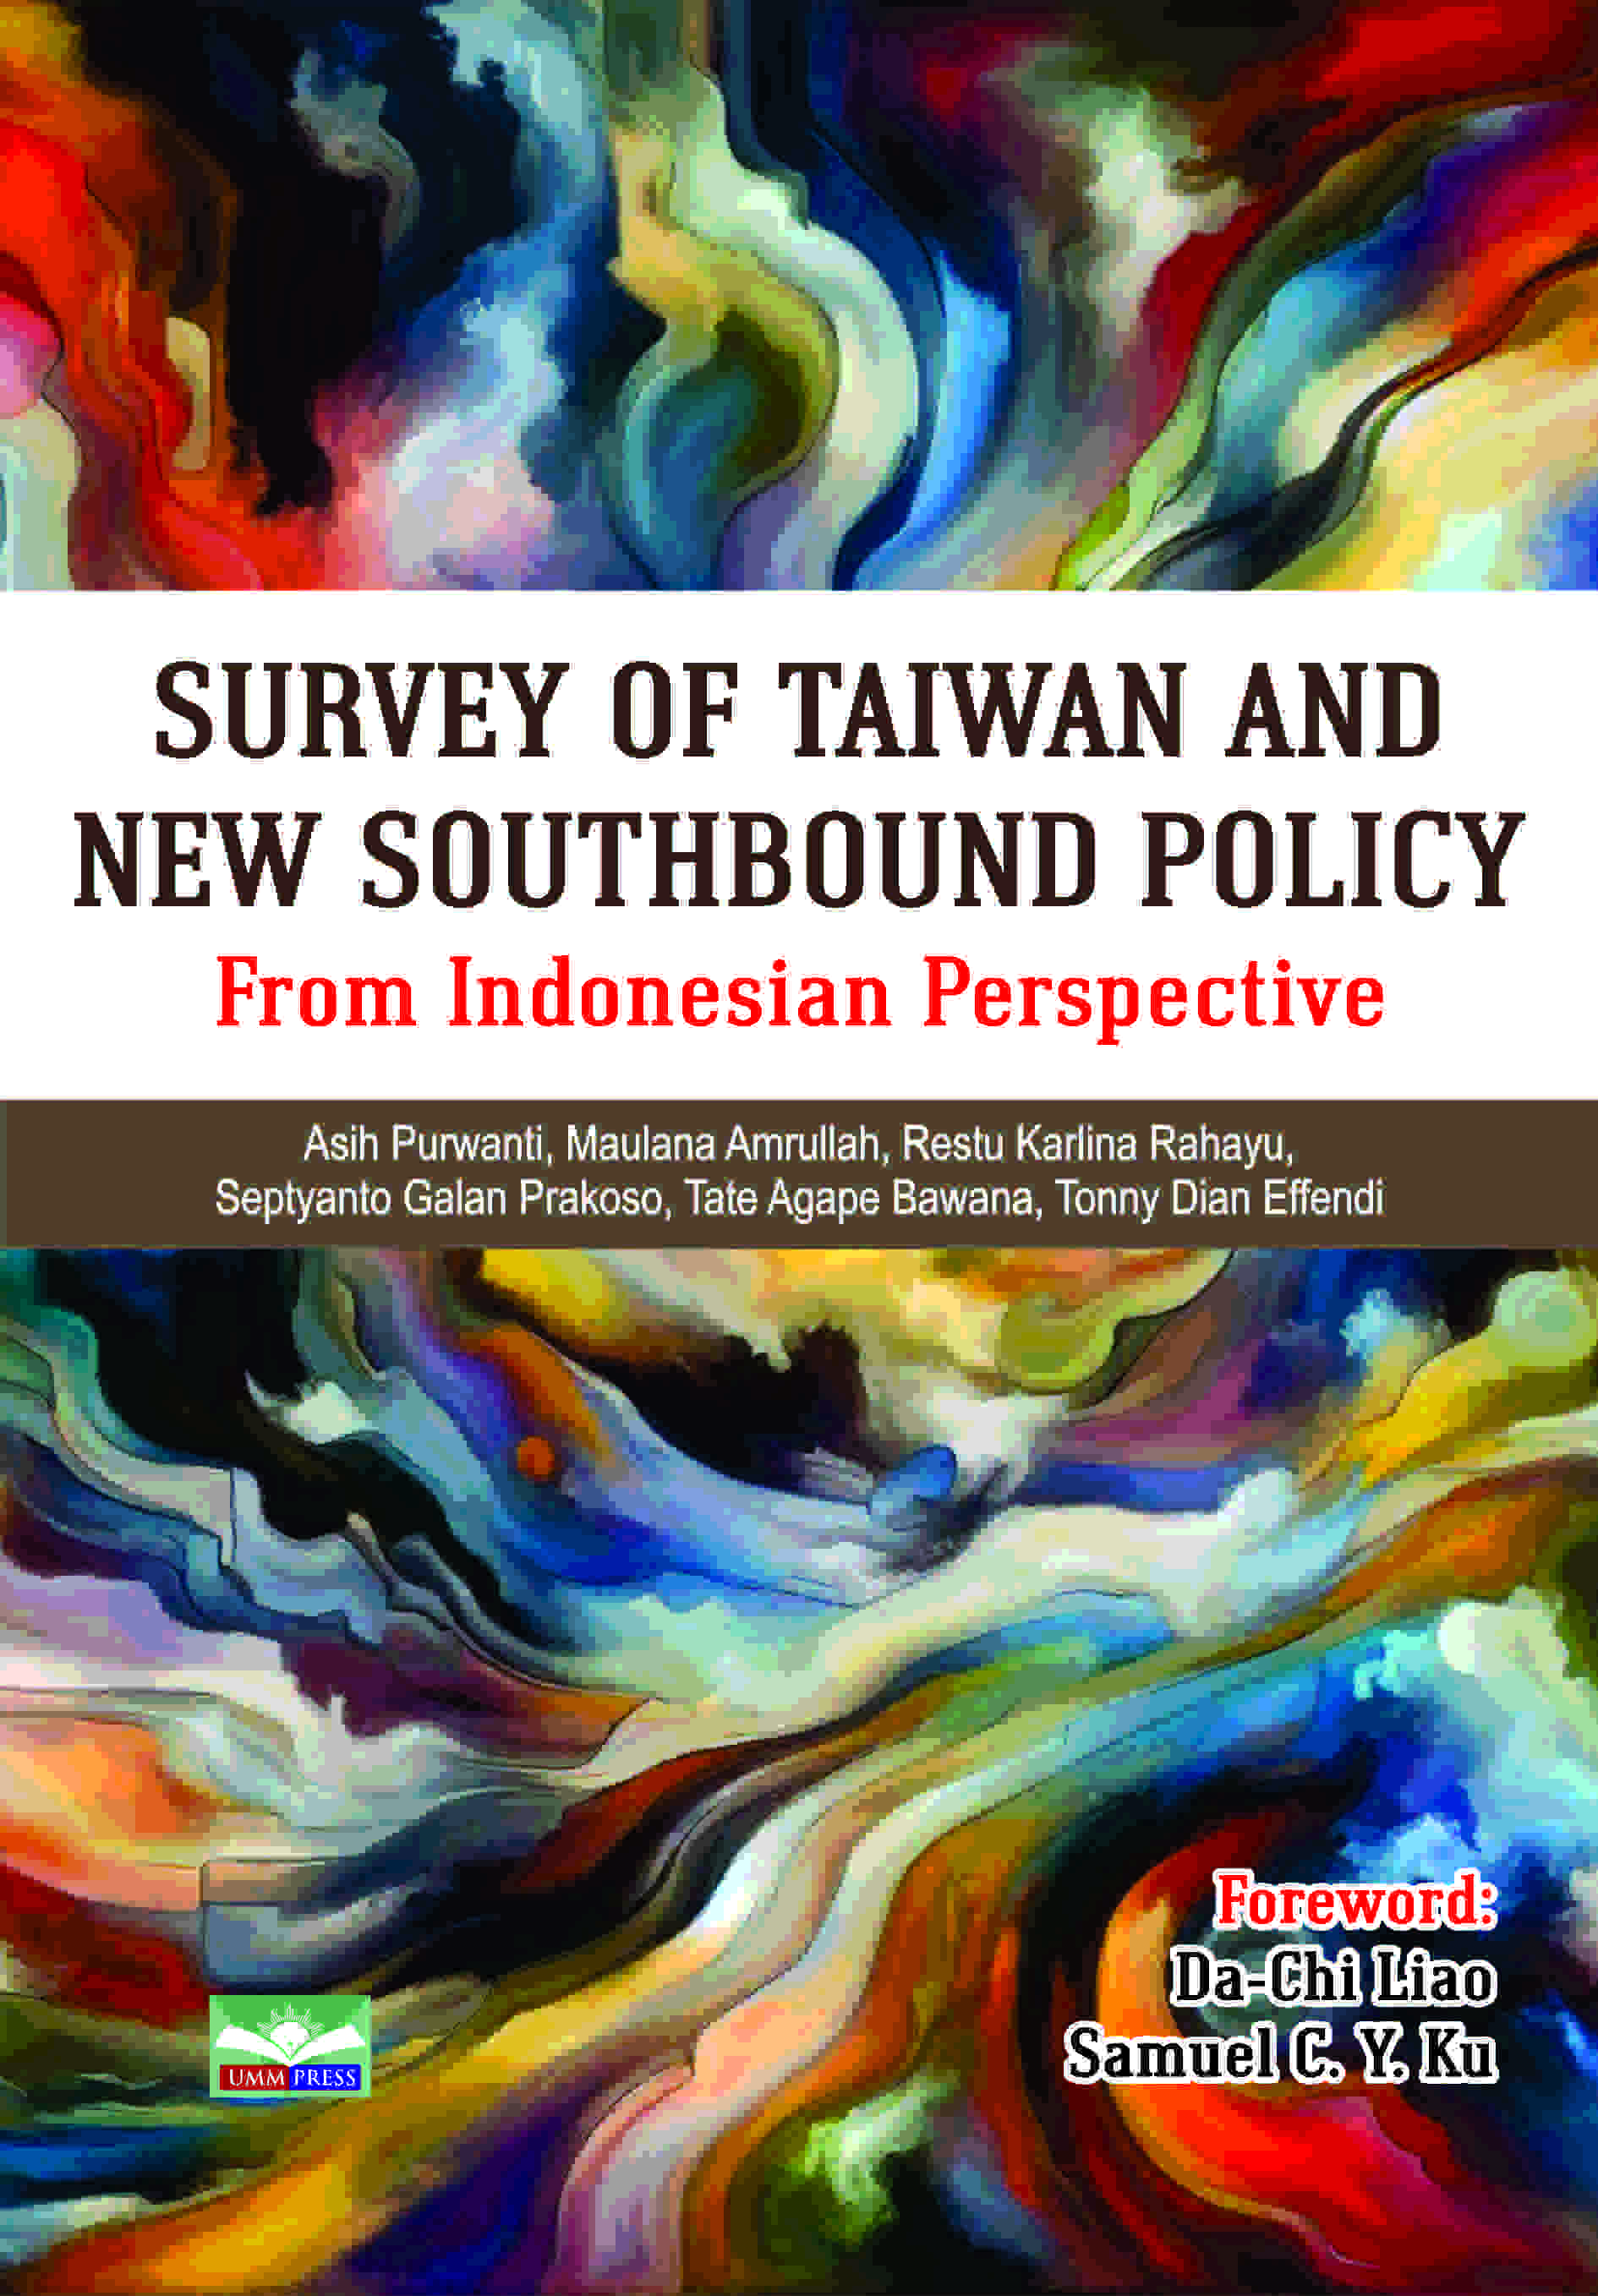 SURVEY OF TAIWAN AND NEW SOUTHBOUND POLICY: FROM INDONESIAN PERSPECTIVE